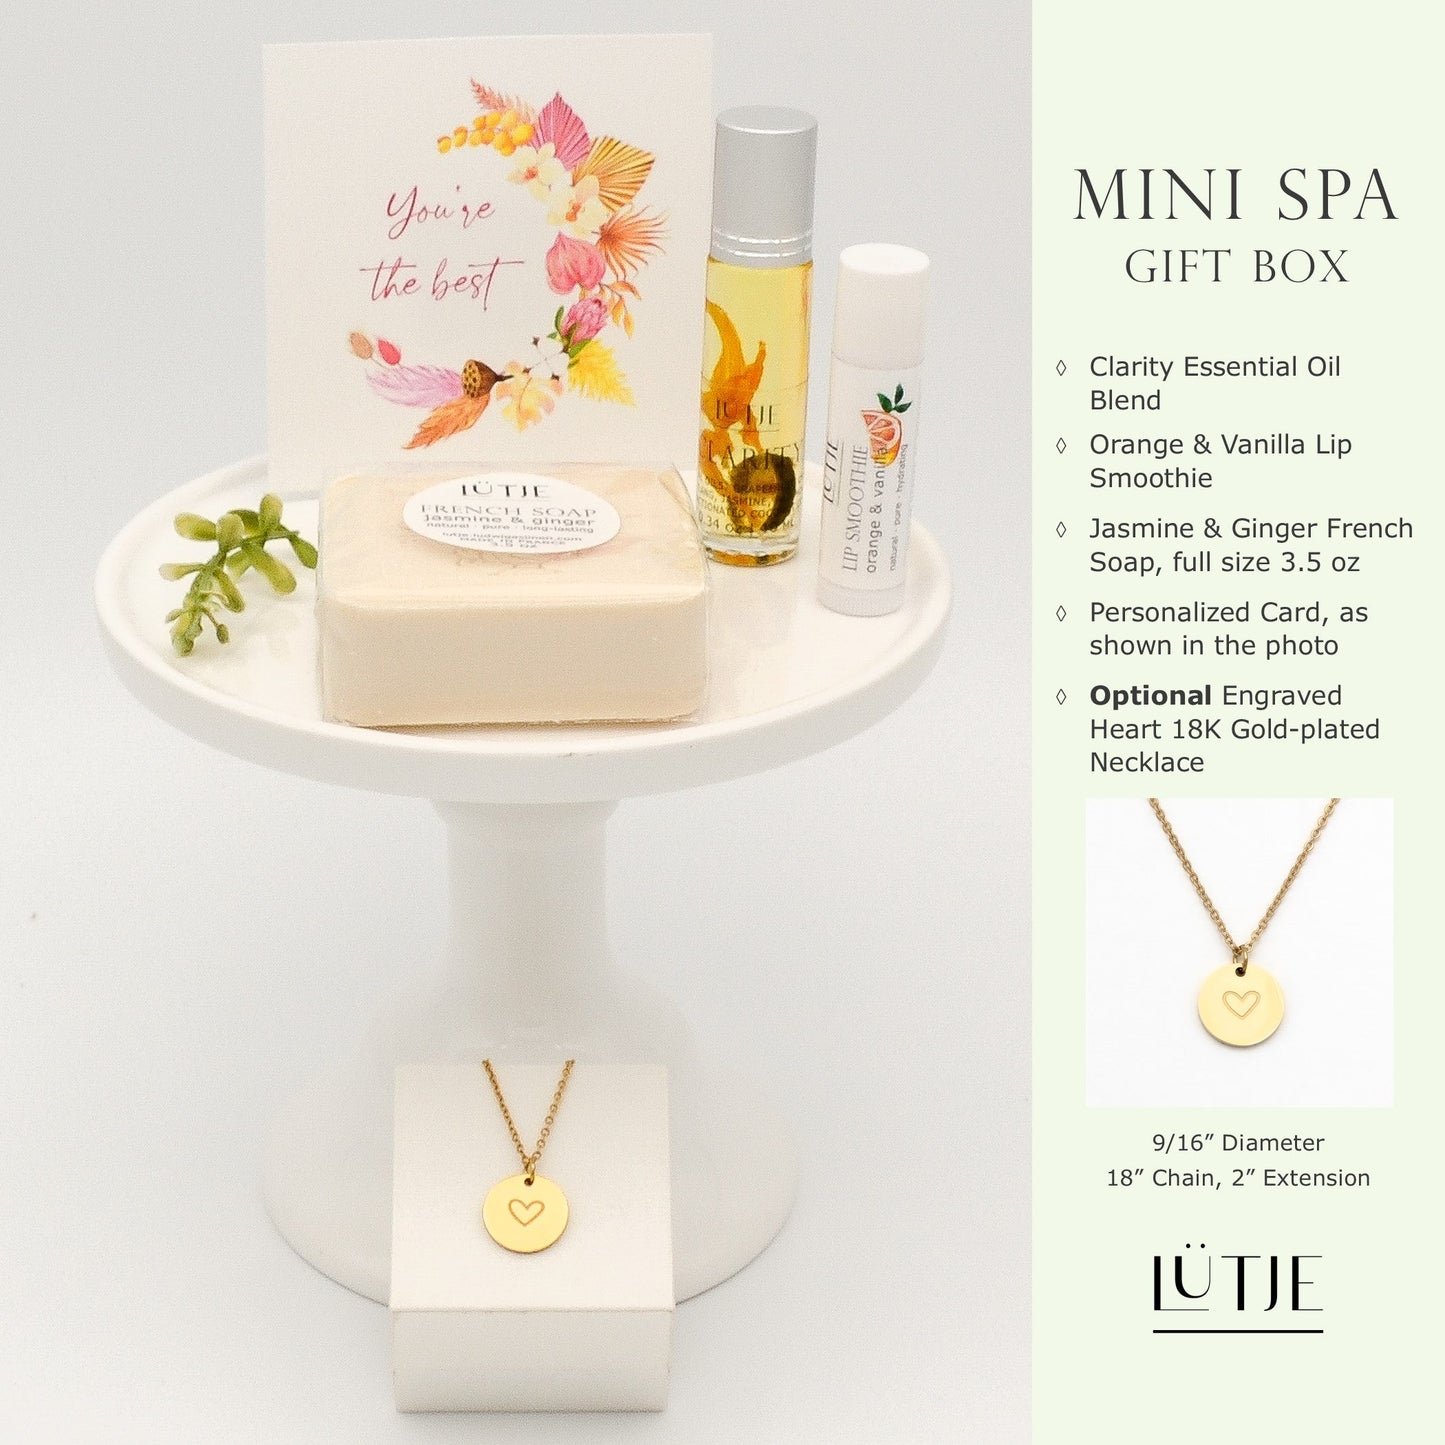 Mini Spa Gift Box for women, sister, daughter, mom, BFF, wife or grandma, includes essential oil, French soap, lip balm, and optional 18K gold-plated necklace with engraved heart.